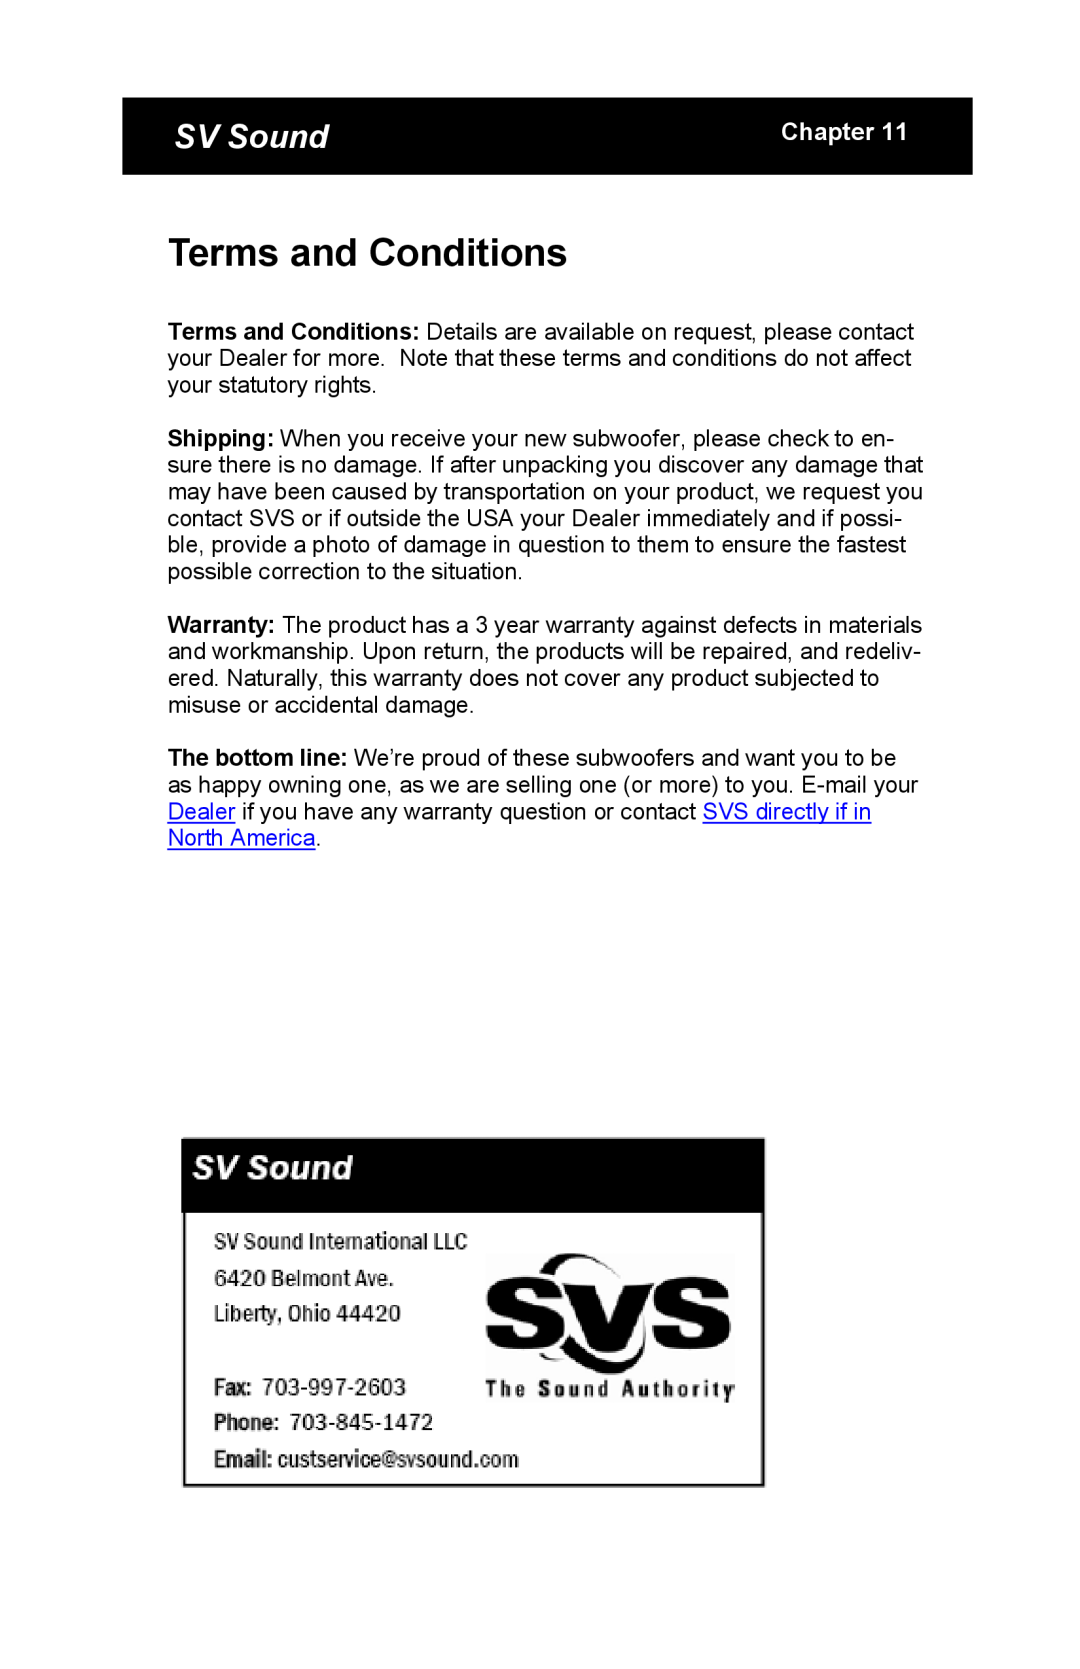 SV Sound PB13 specifications Terms and Conditions, SV Sound, Chapter 